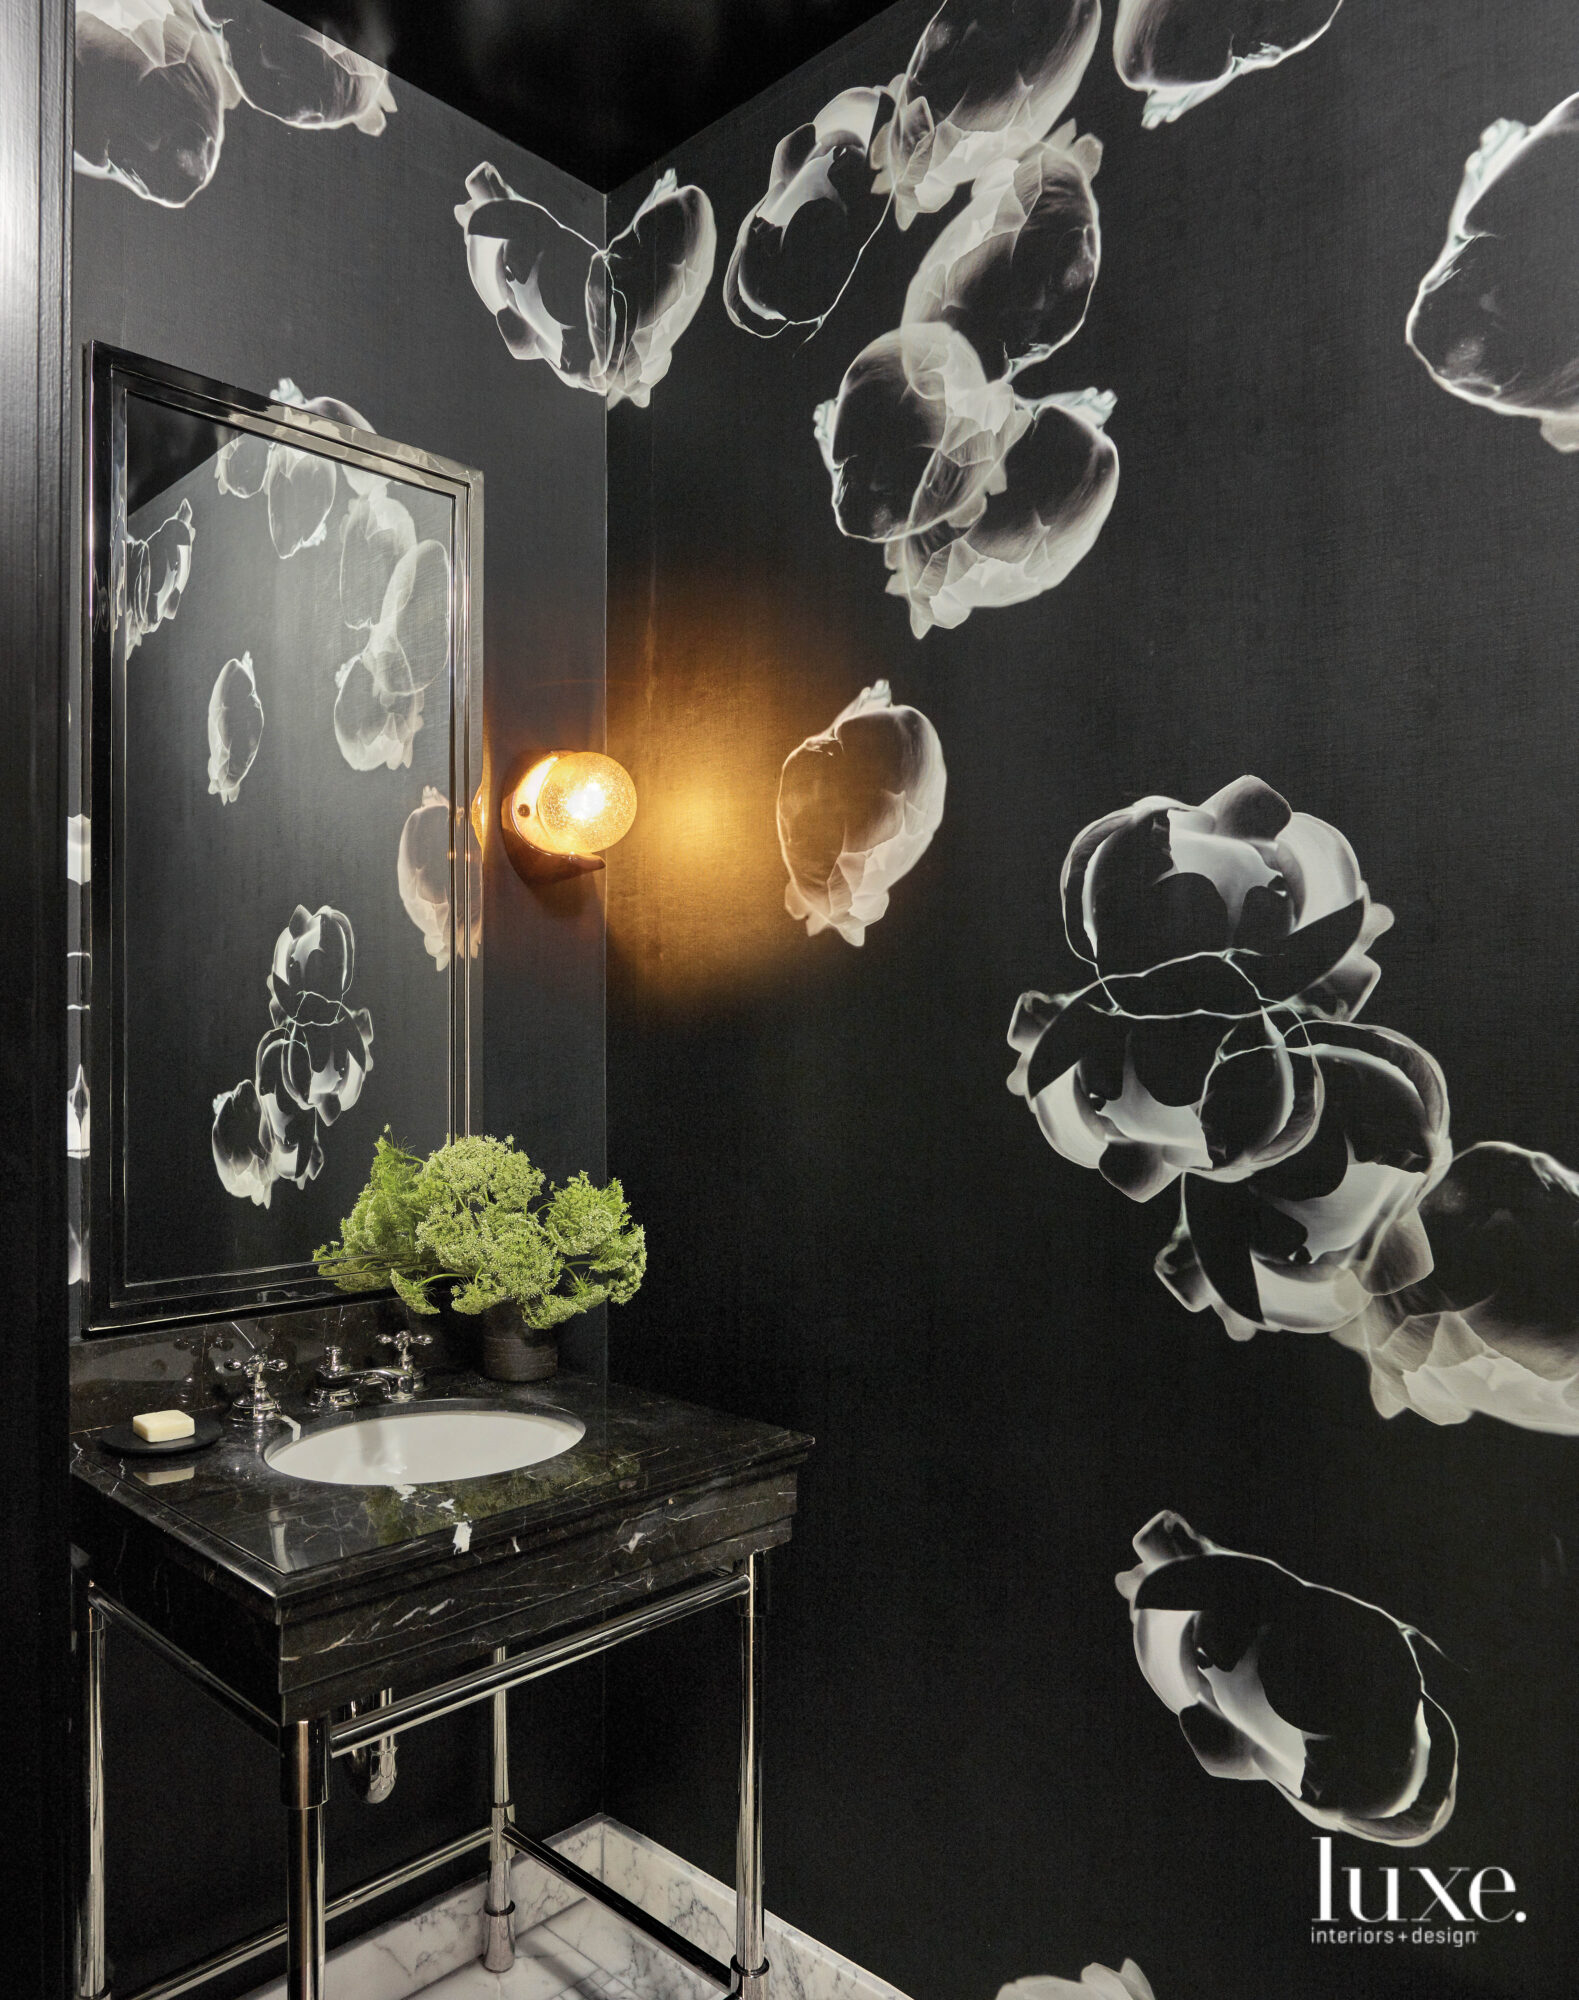 A black and white floral wallpaper covers the dark, moody yet sophisticated bathroom